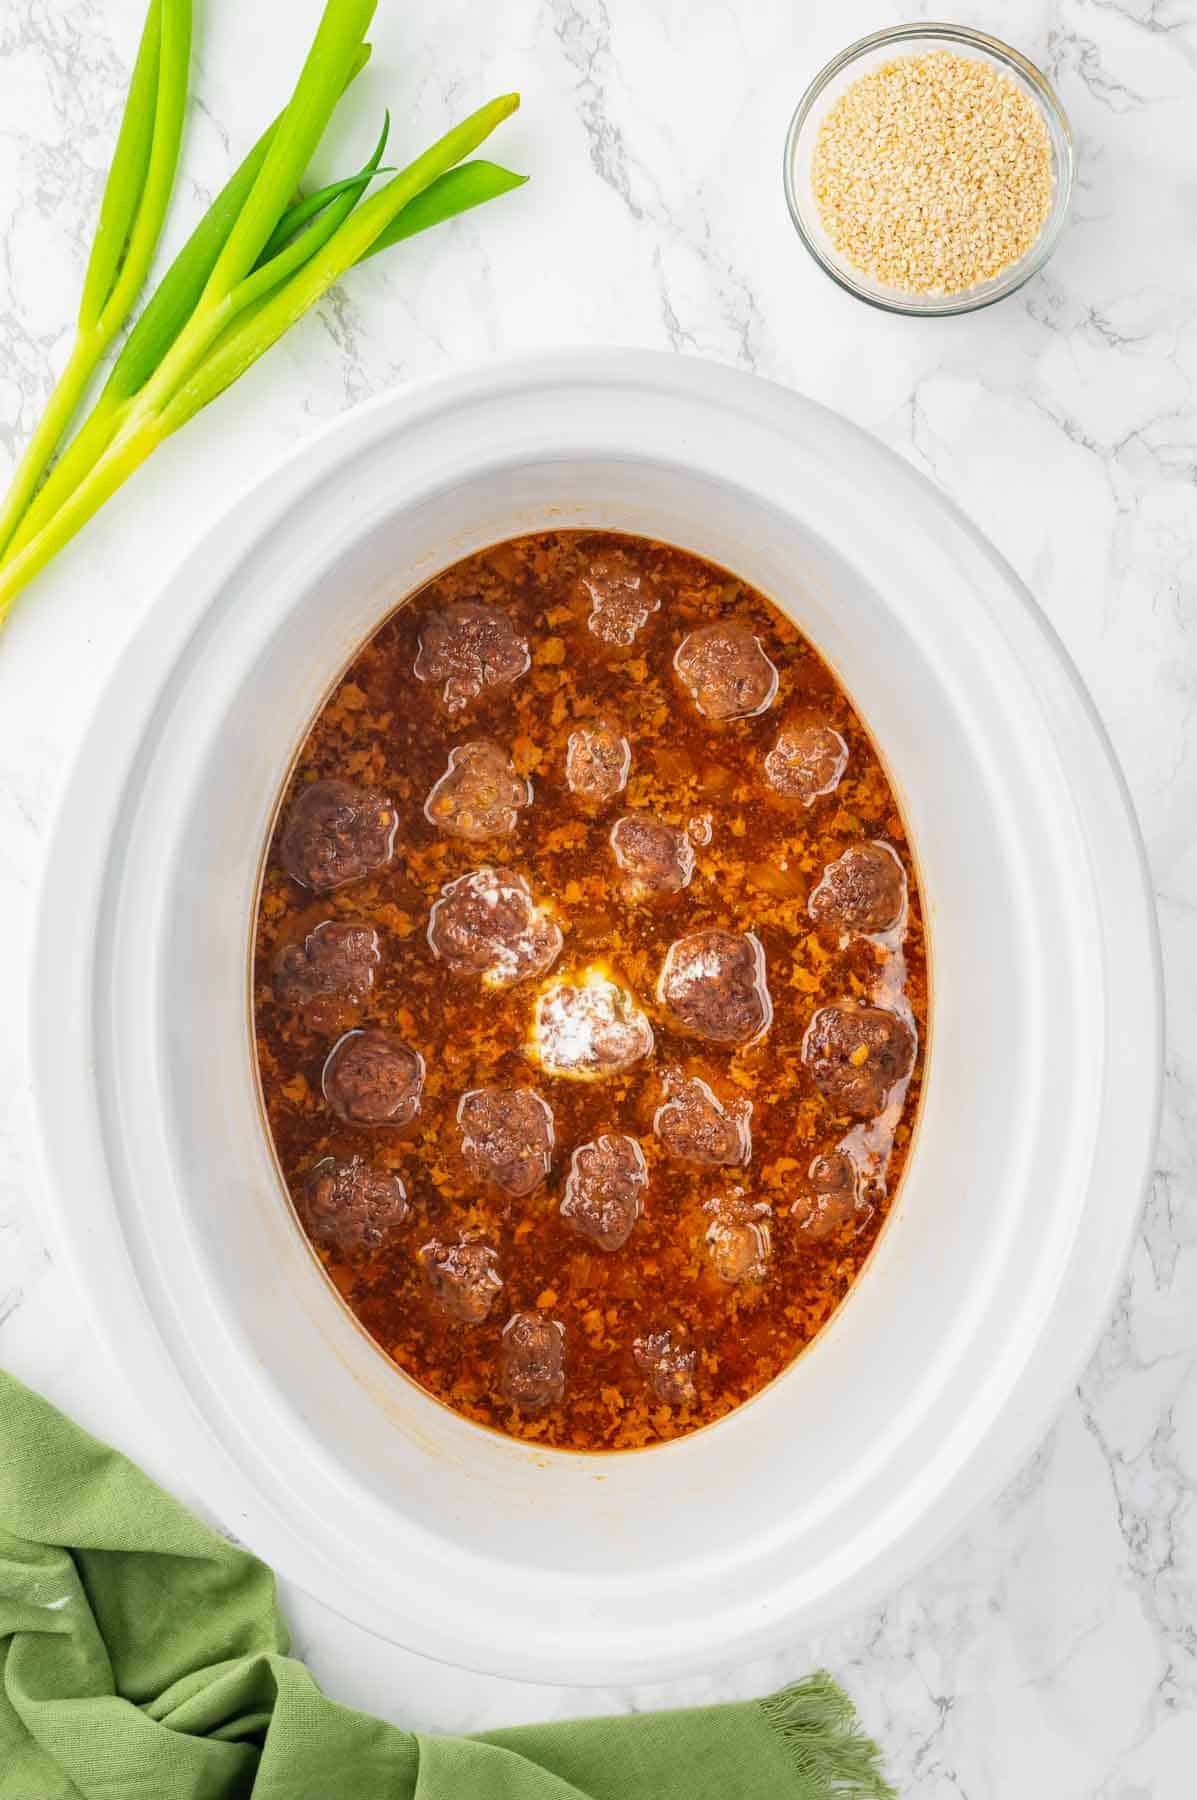 cornstarch slurry added to crock pot with teriyaki meatballs while cooking